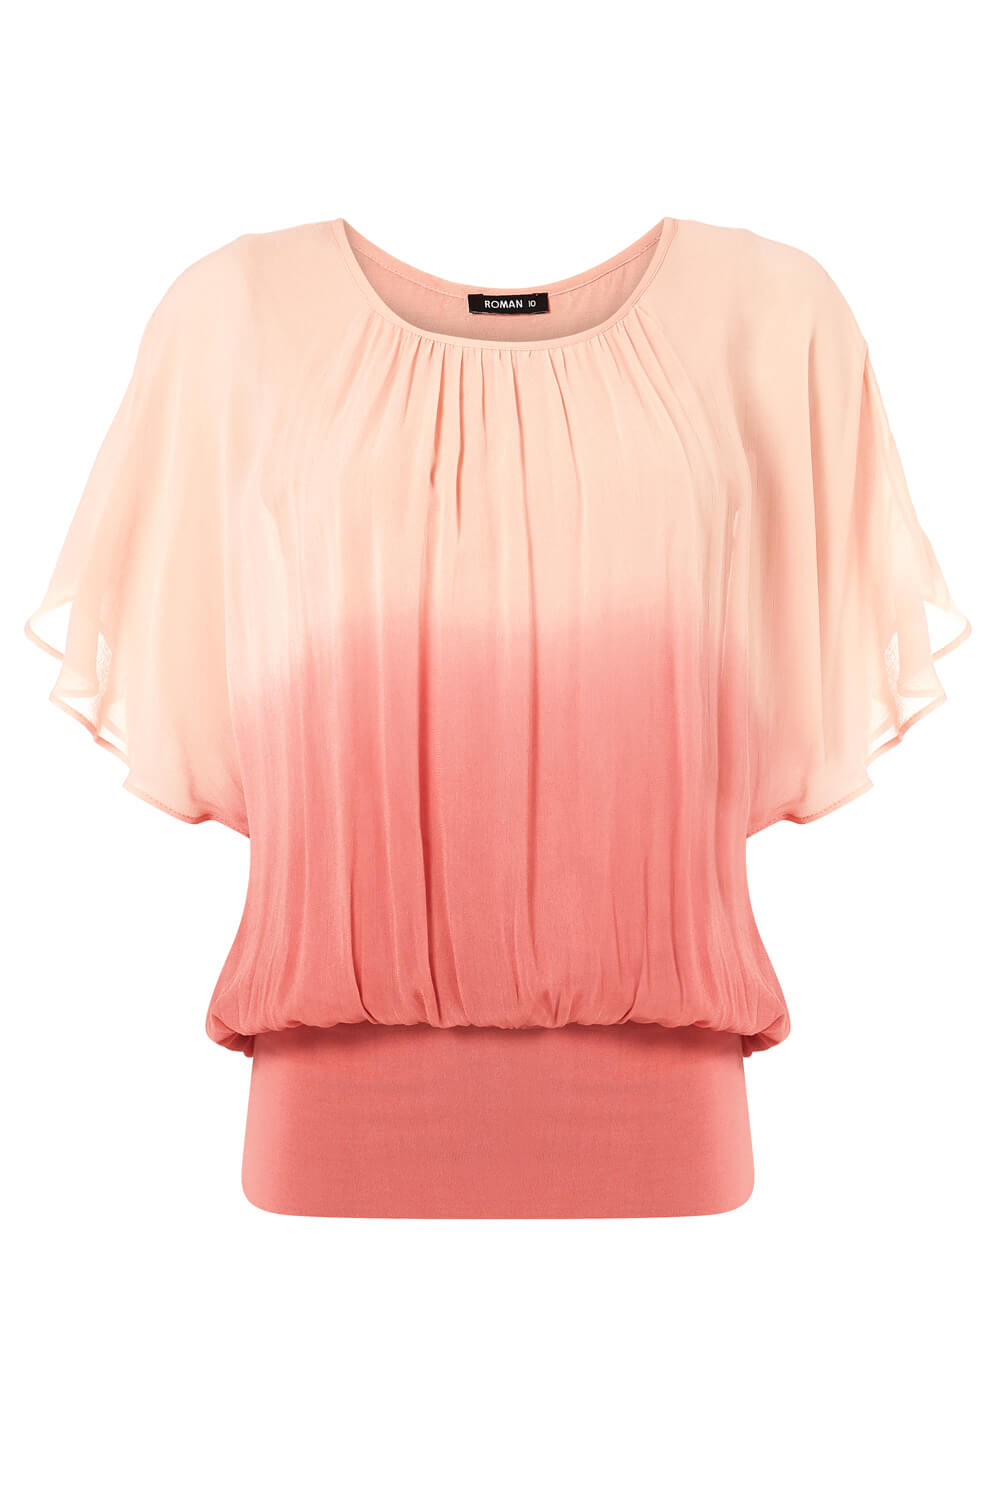 Light Pink Ombre Batwing Overlay Top, Image 5 of 5